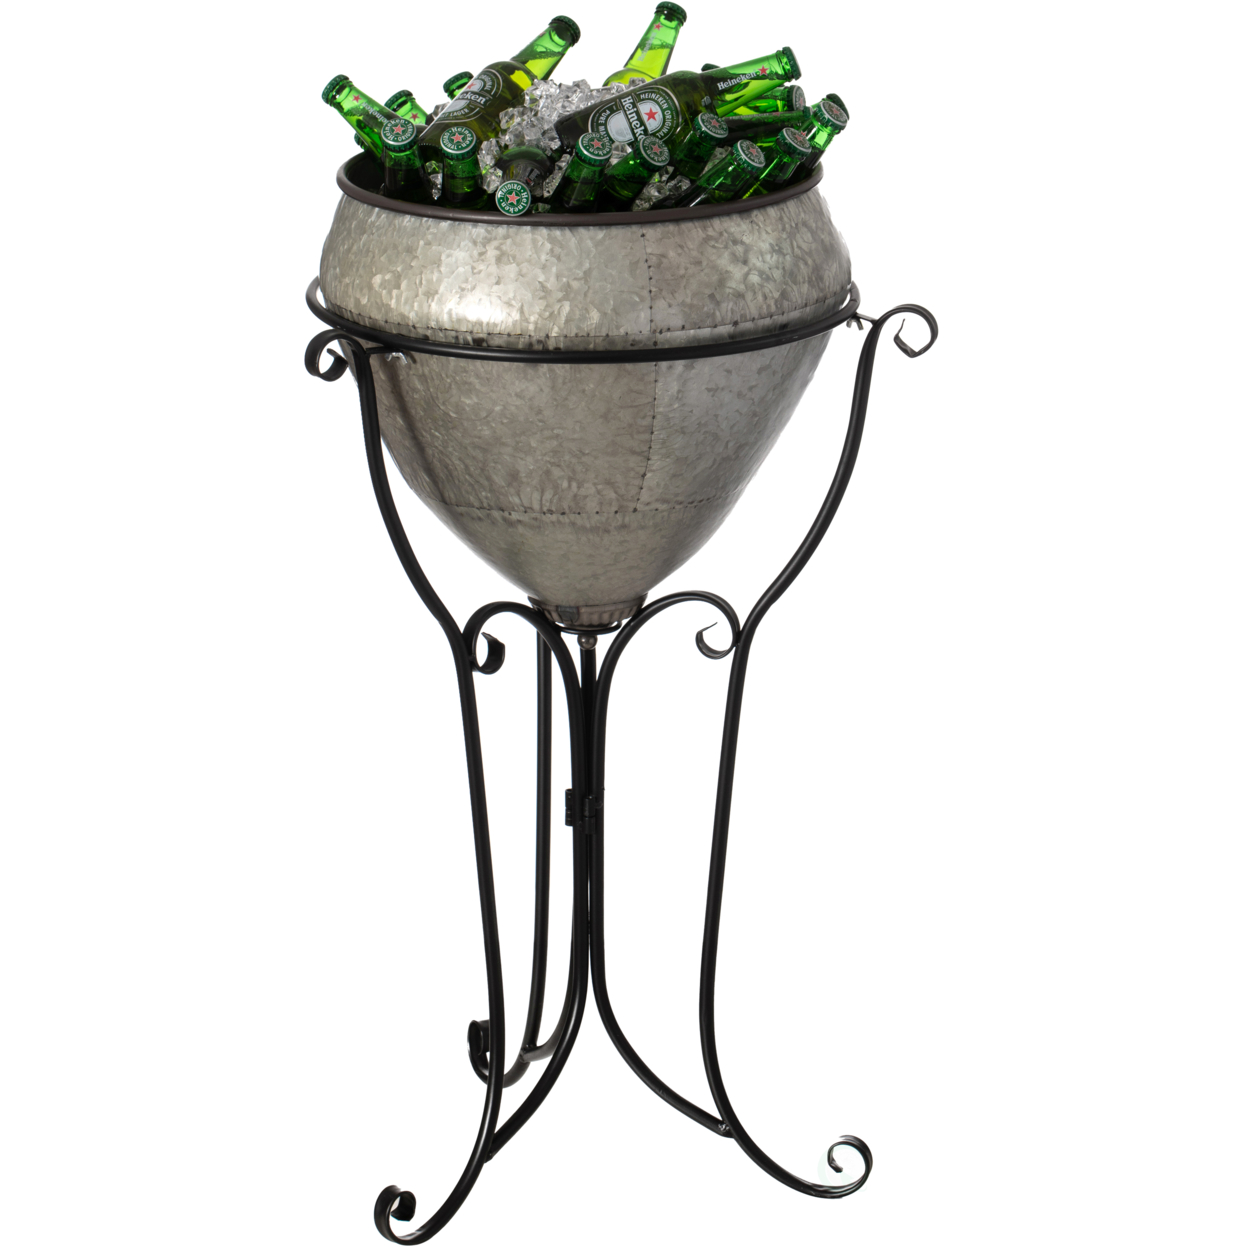 Silver Galvanized Metal Beverage Cooler Tub With Liner And Stand - Large